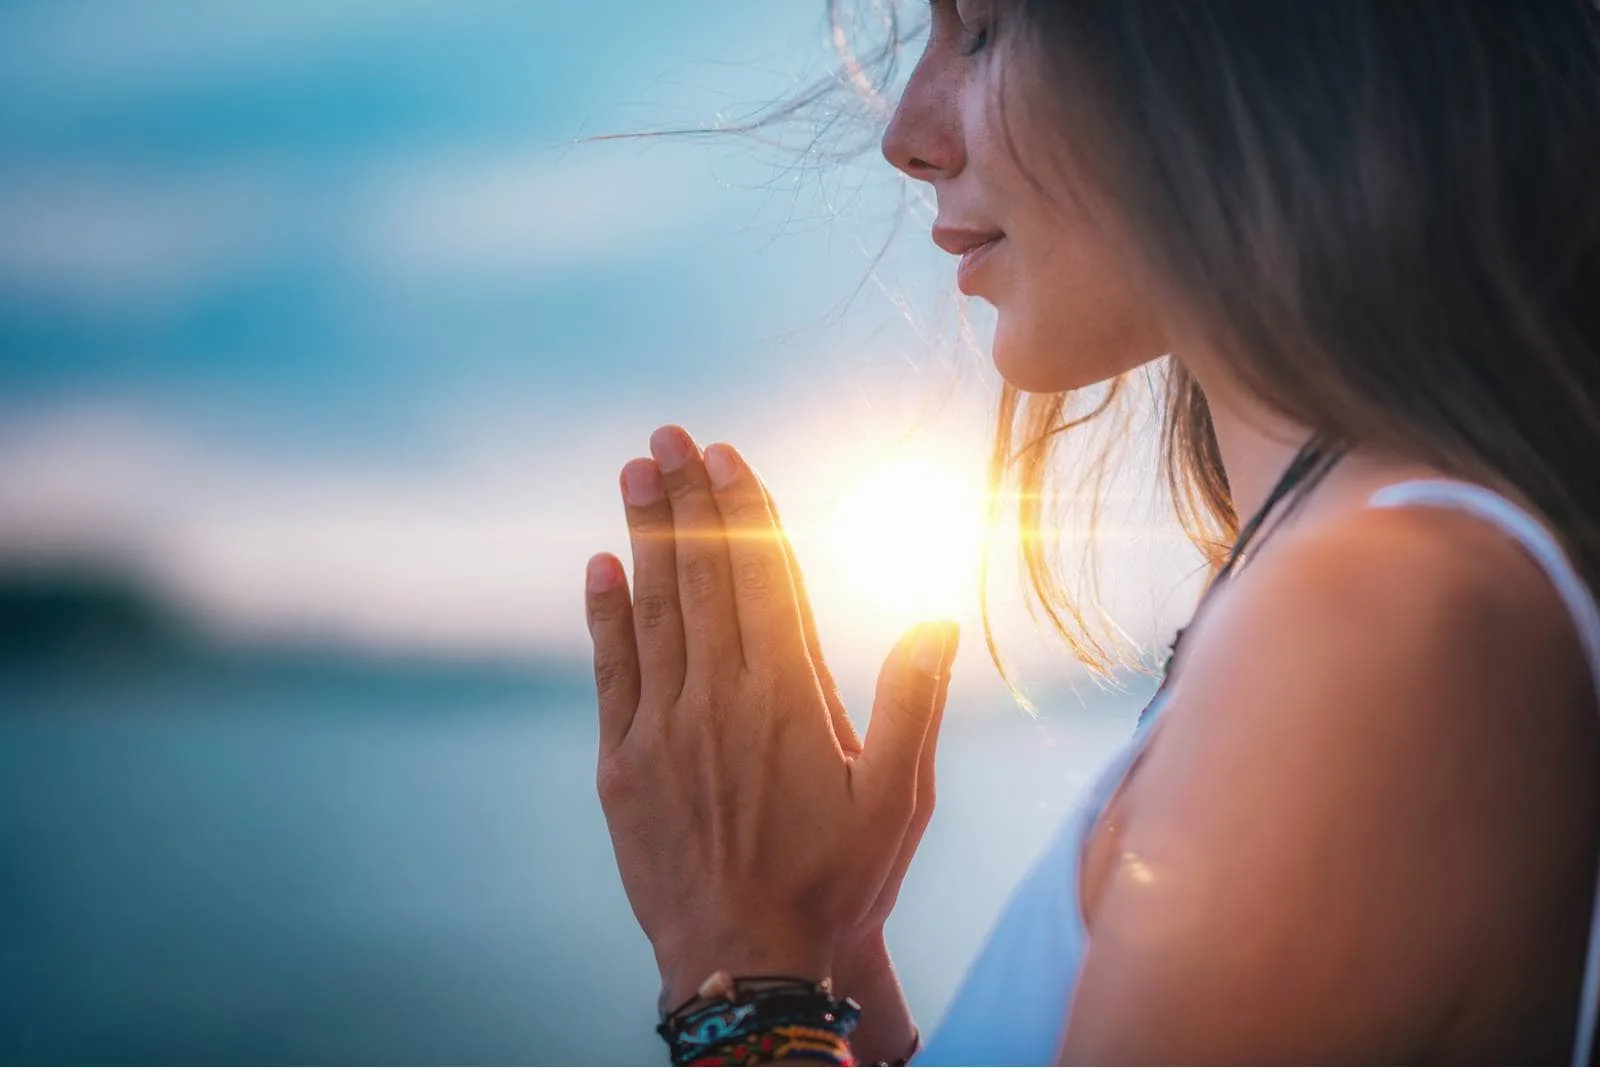 woman with praying hands meditating/praying outdoors with a sunset /sunrise 